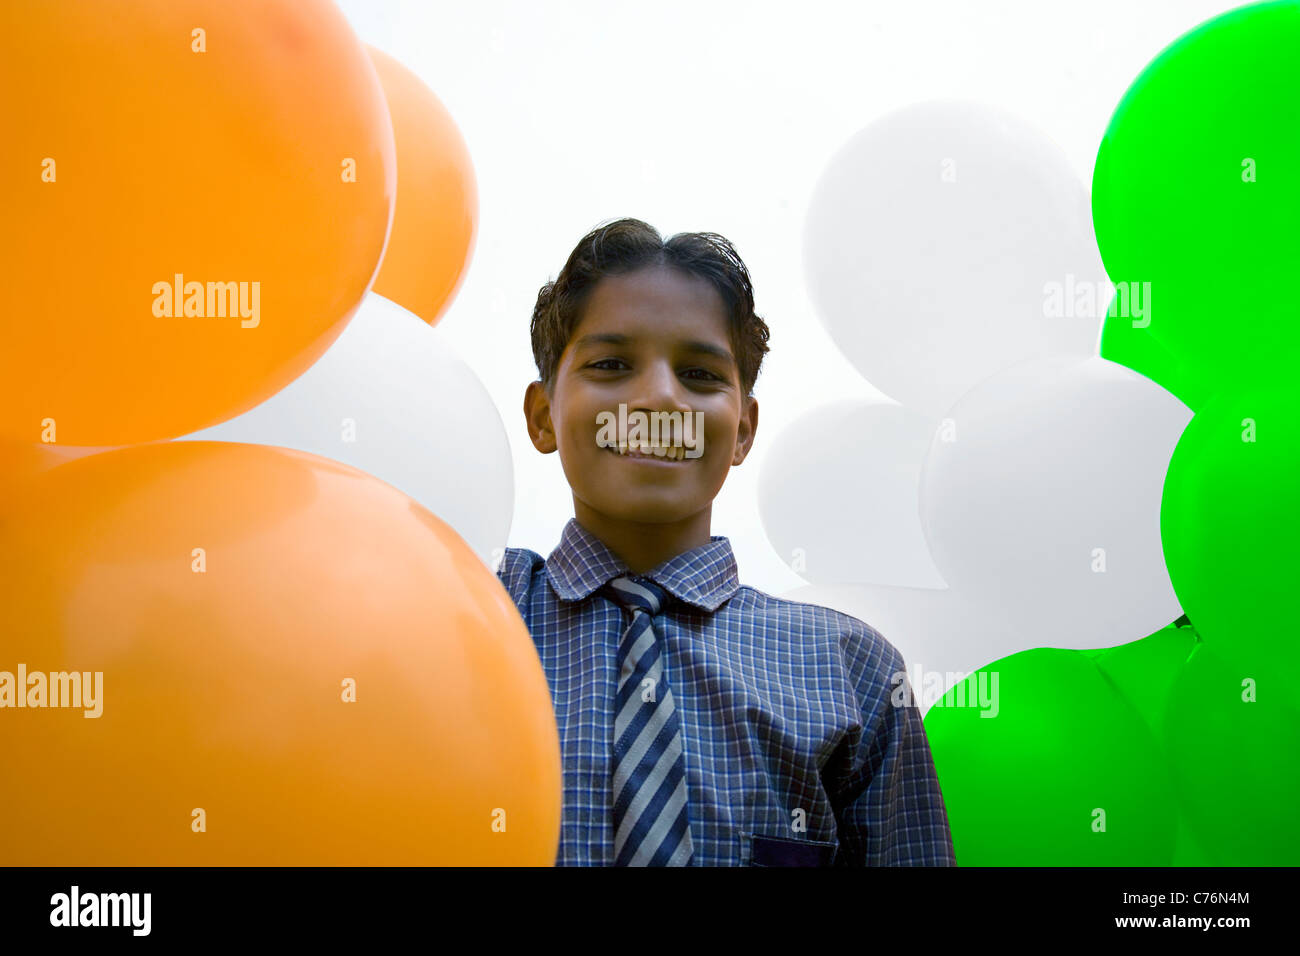 Portrait of a school boy with balloons Stock Photo